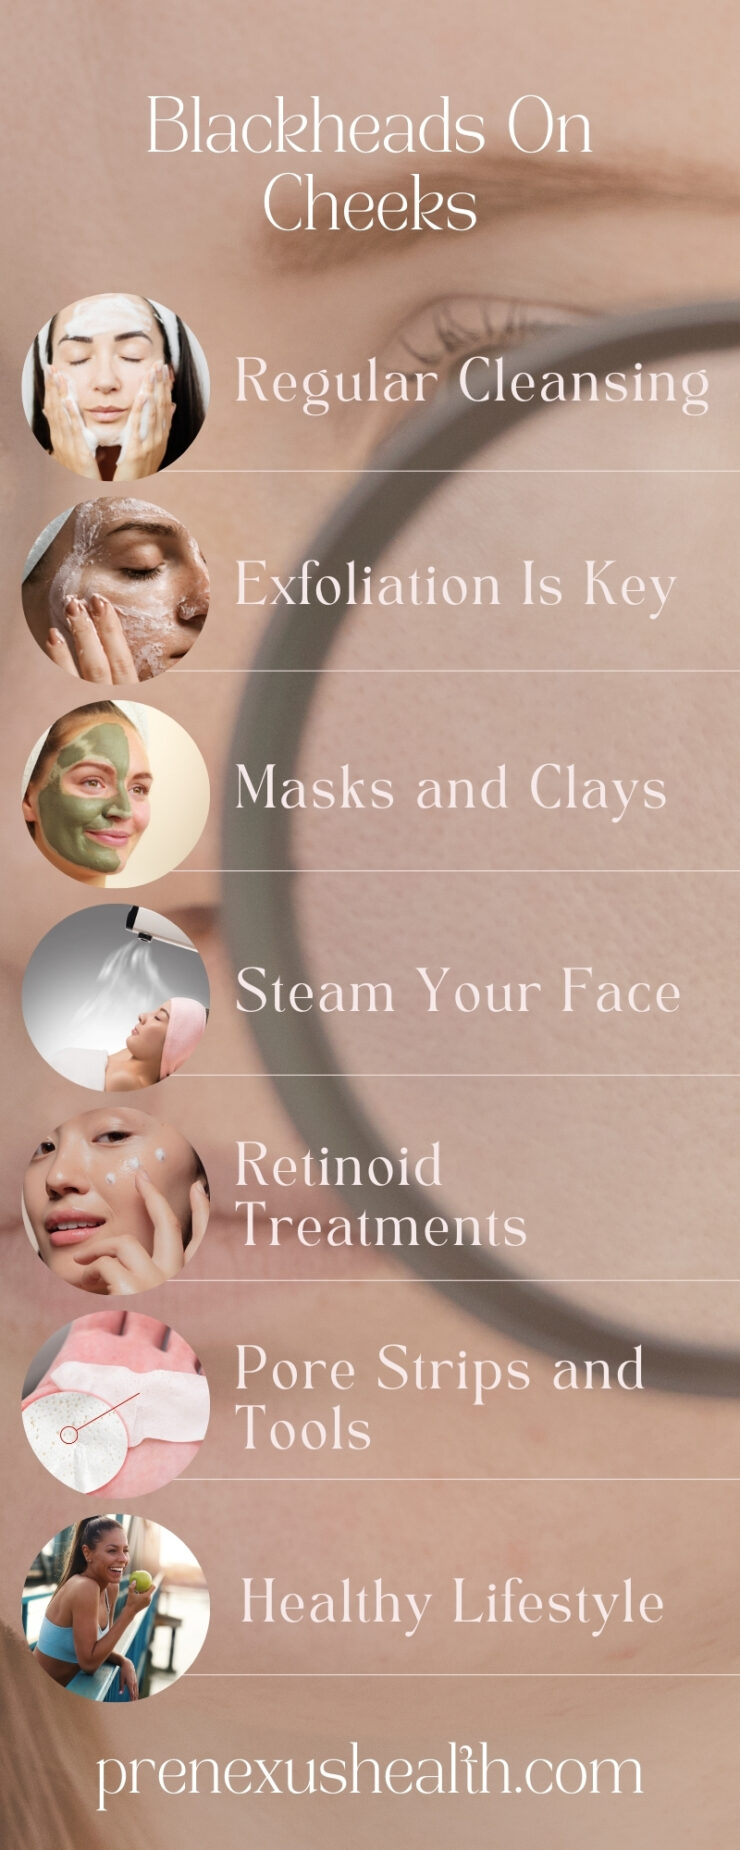 Get Rid Of Blackheads On Cheeks Infographic